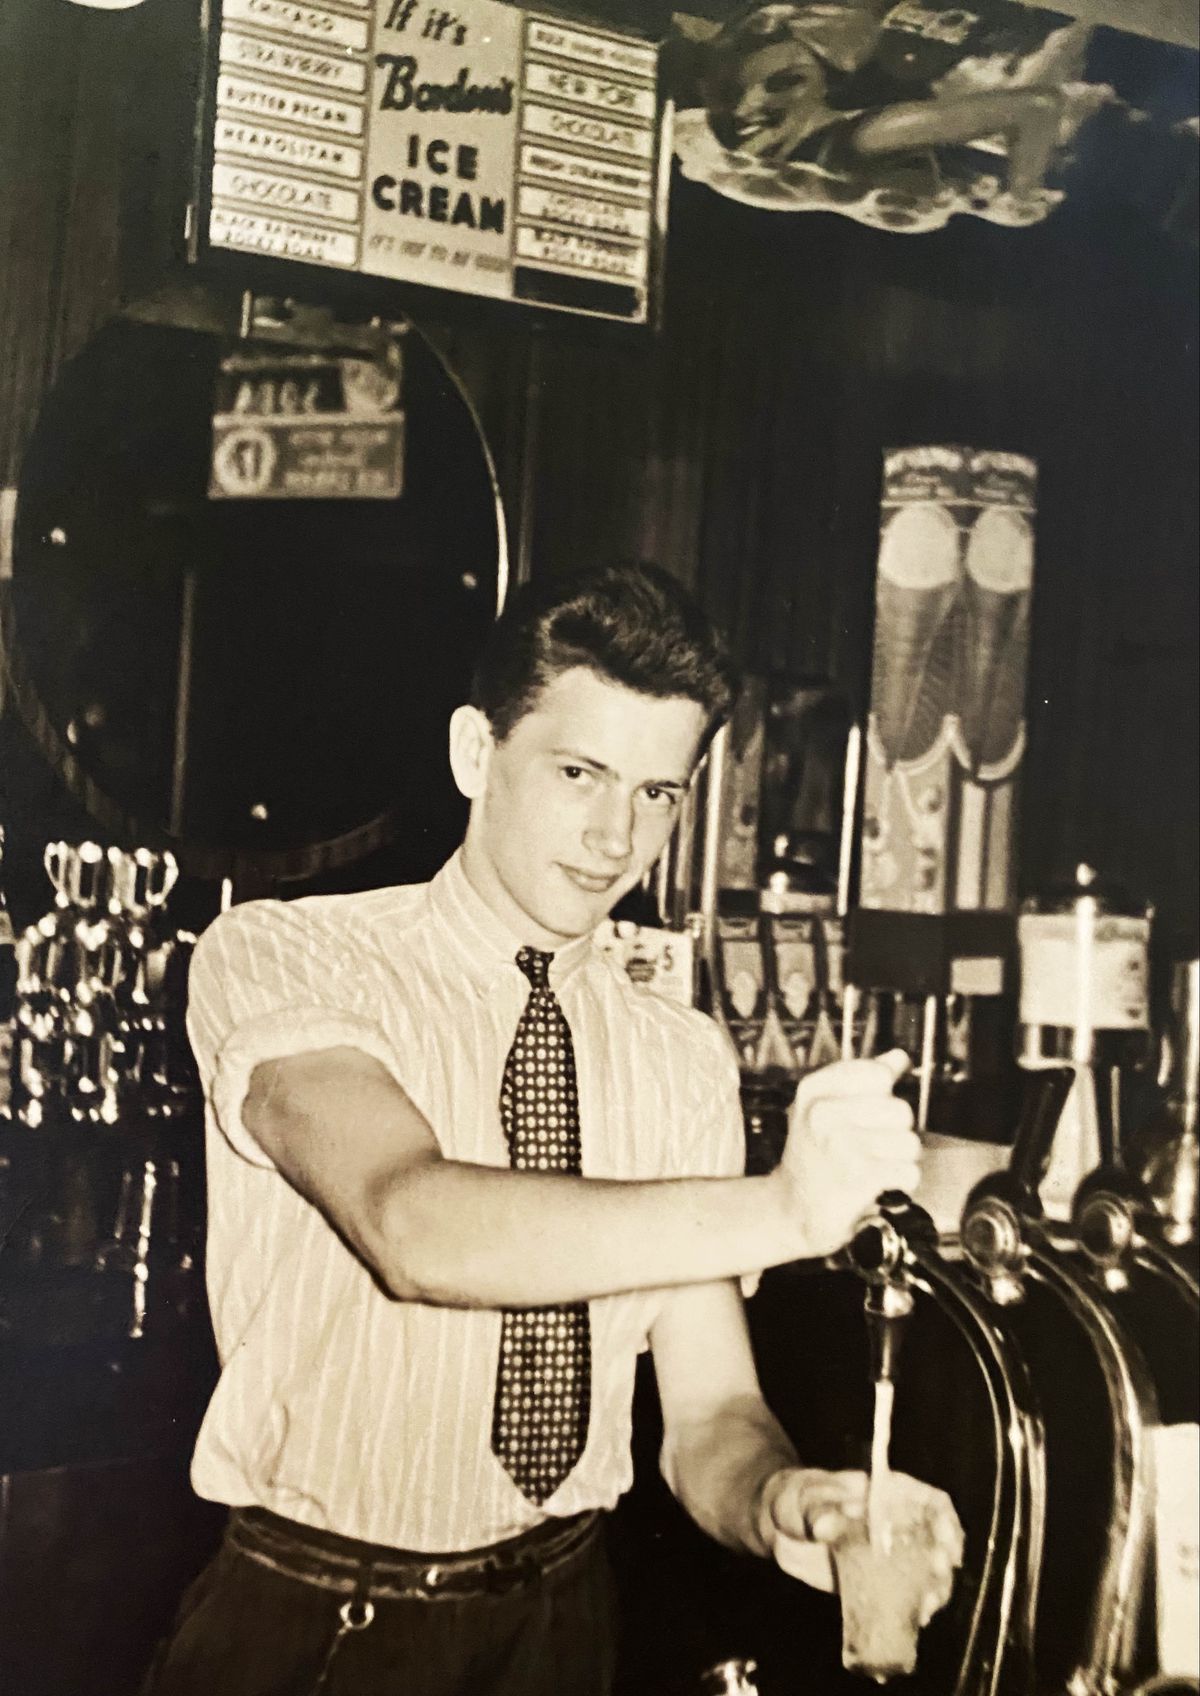 Young Bernie Roer worked as a soda jerk at a Musket &amp; Henriksen pharmacy.